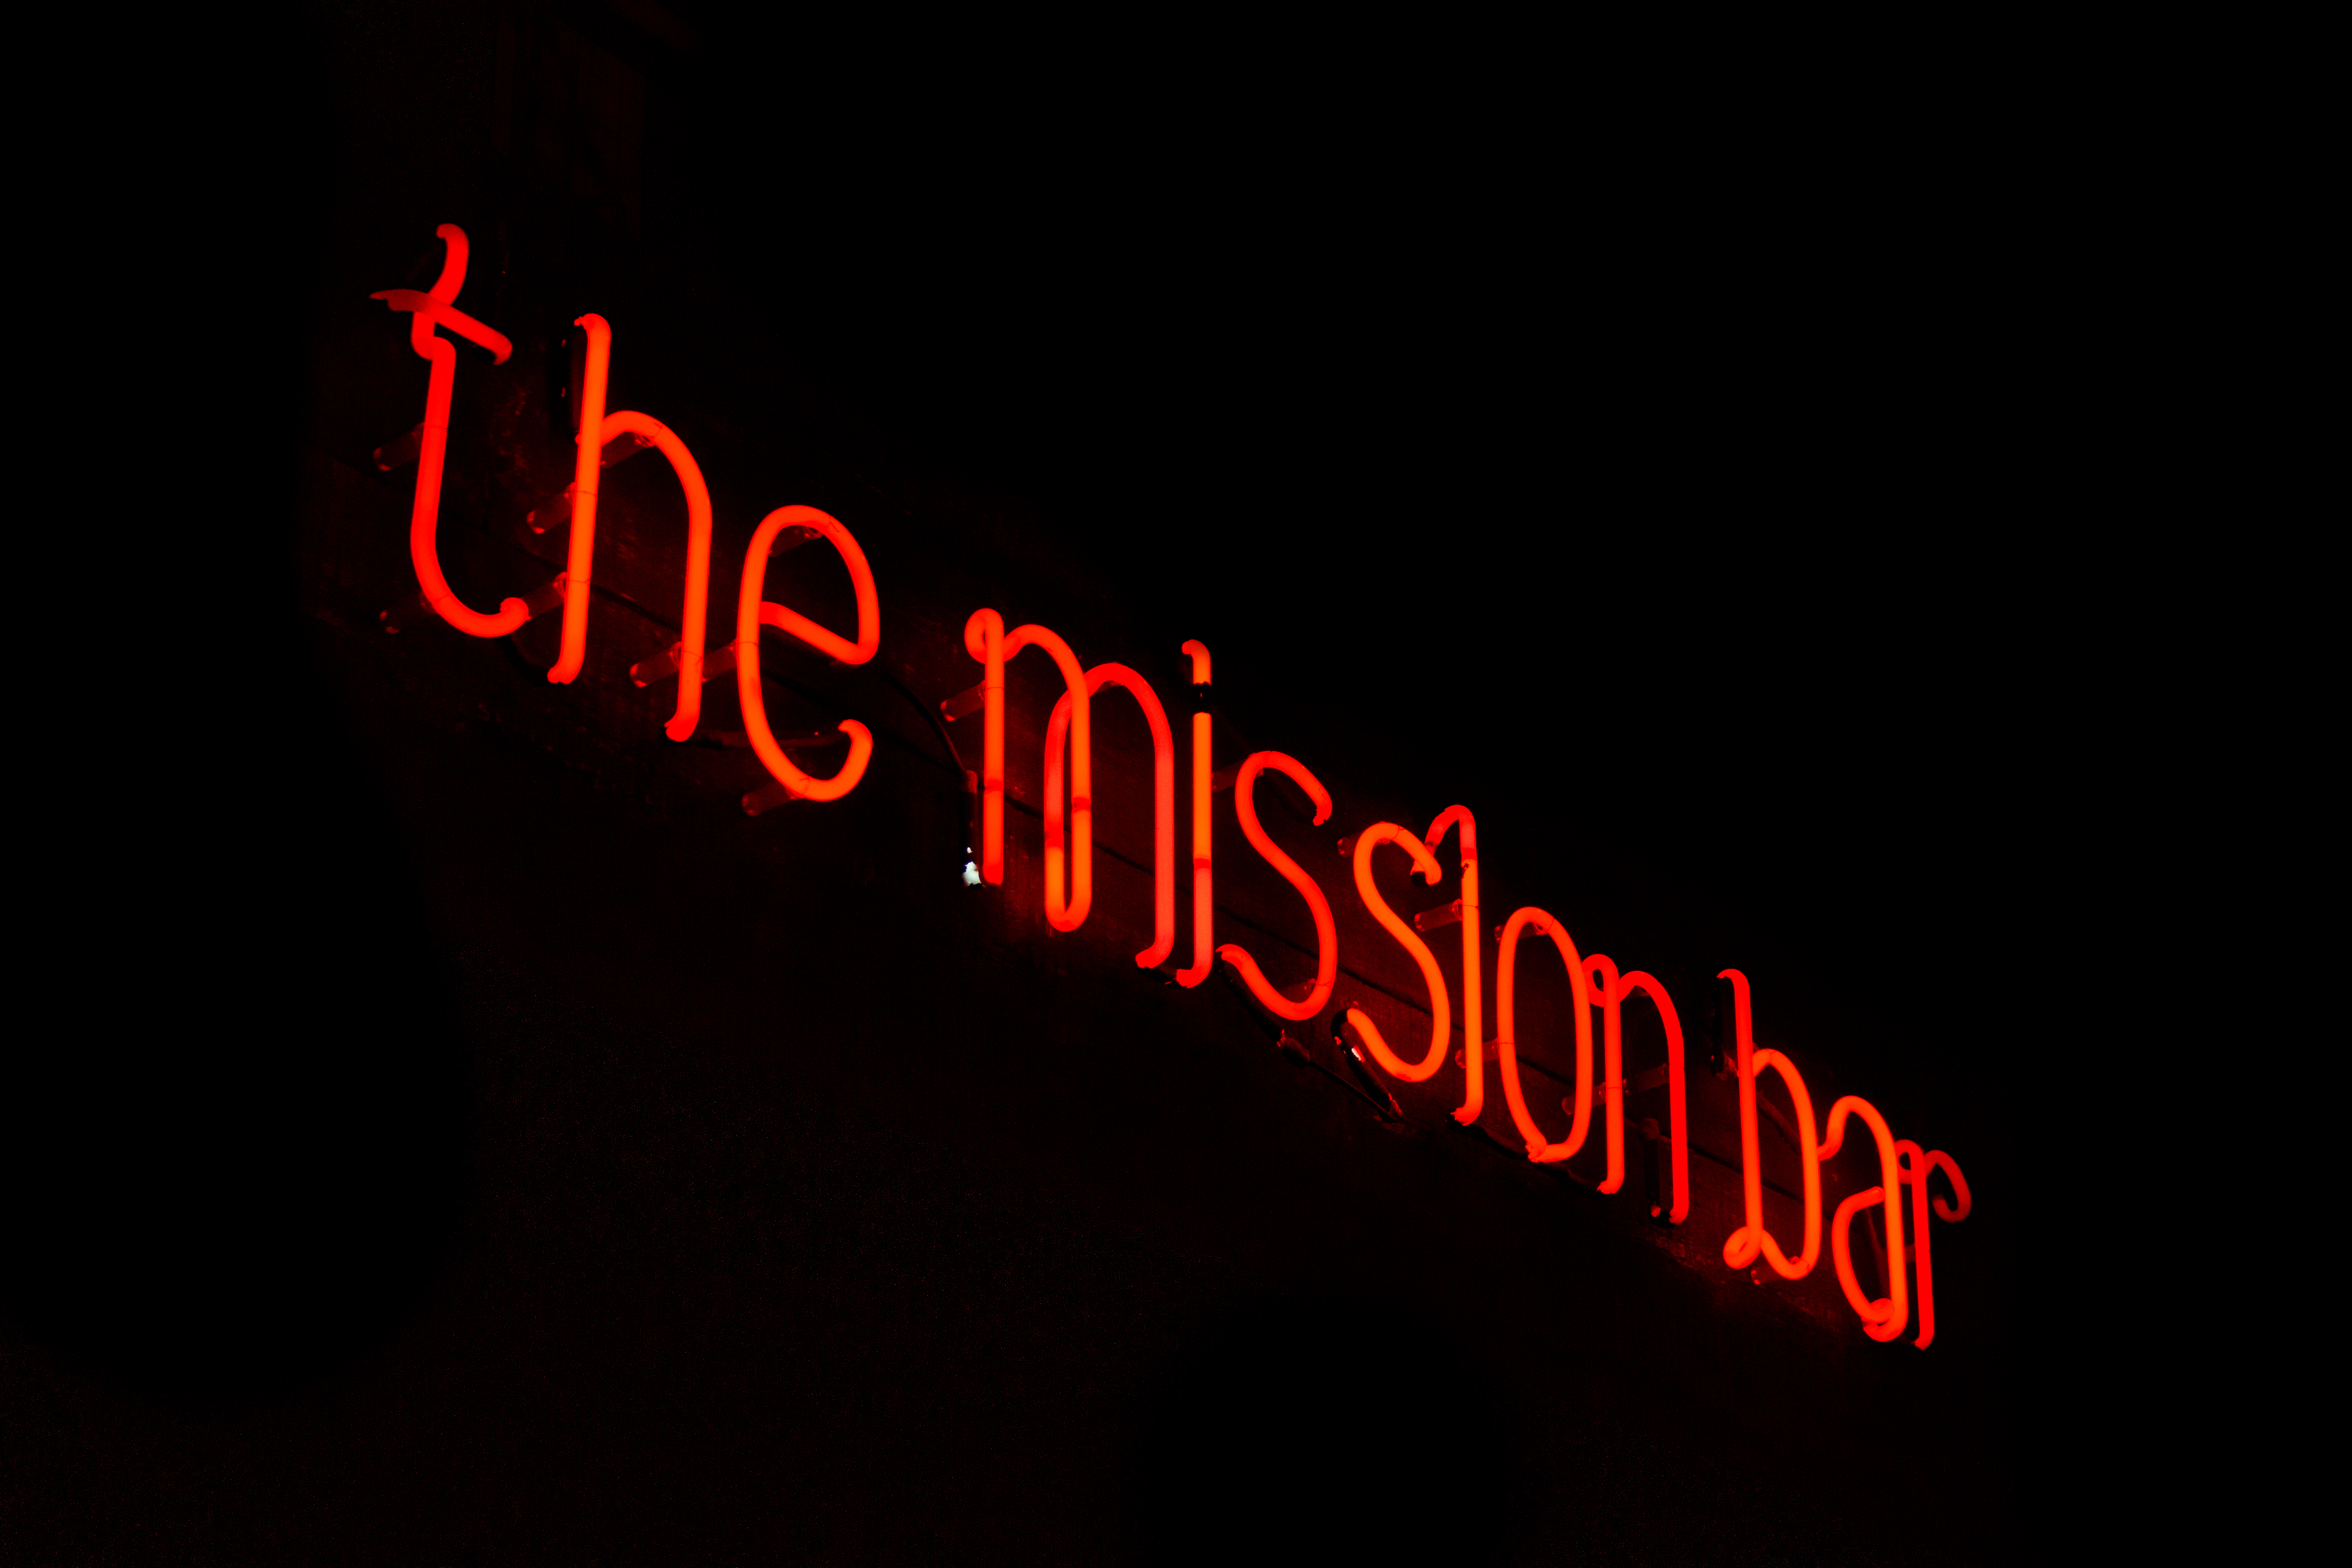 The mission bar